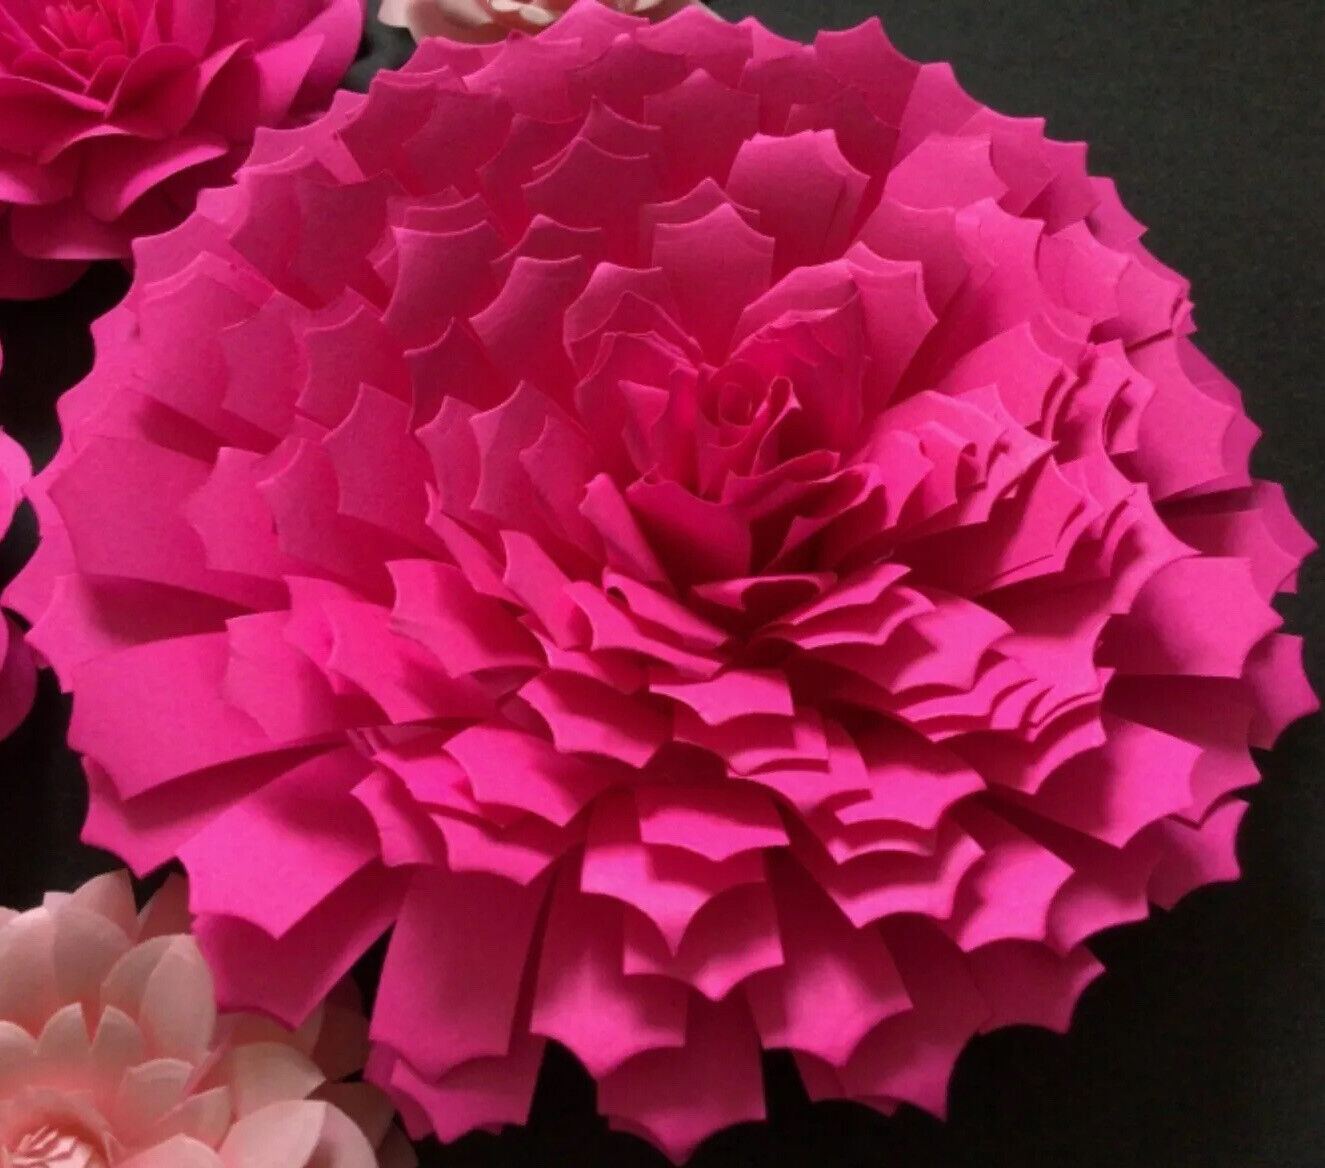 Paper Flowers 3-D Handcrafted 5 pcs Pink DIY Wedding Party Decor Craft Backdrop Unbranded Small Backdrop - фотография #4